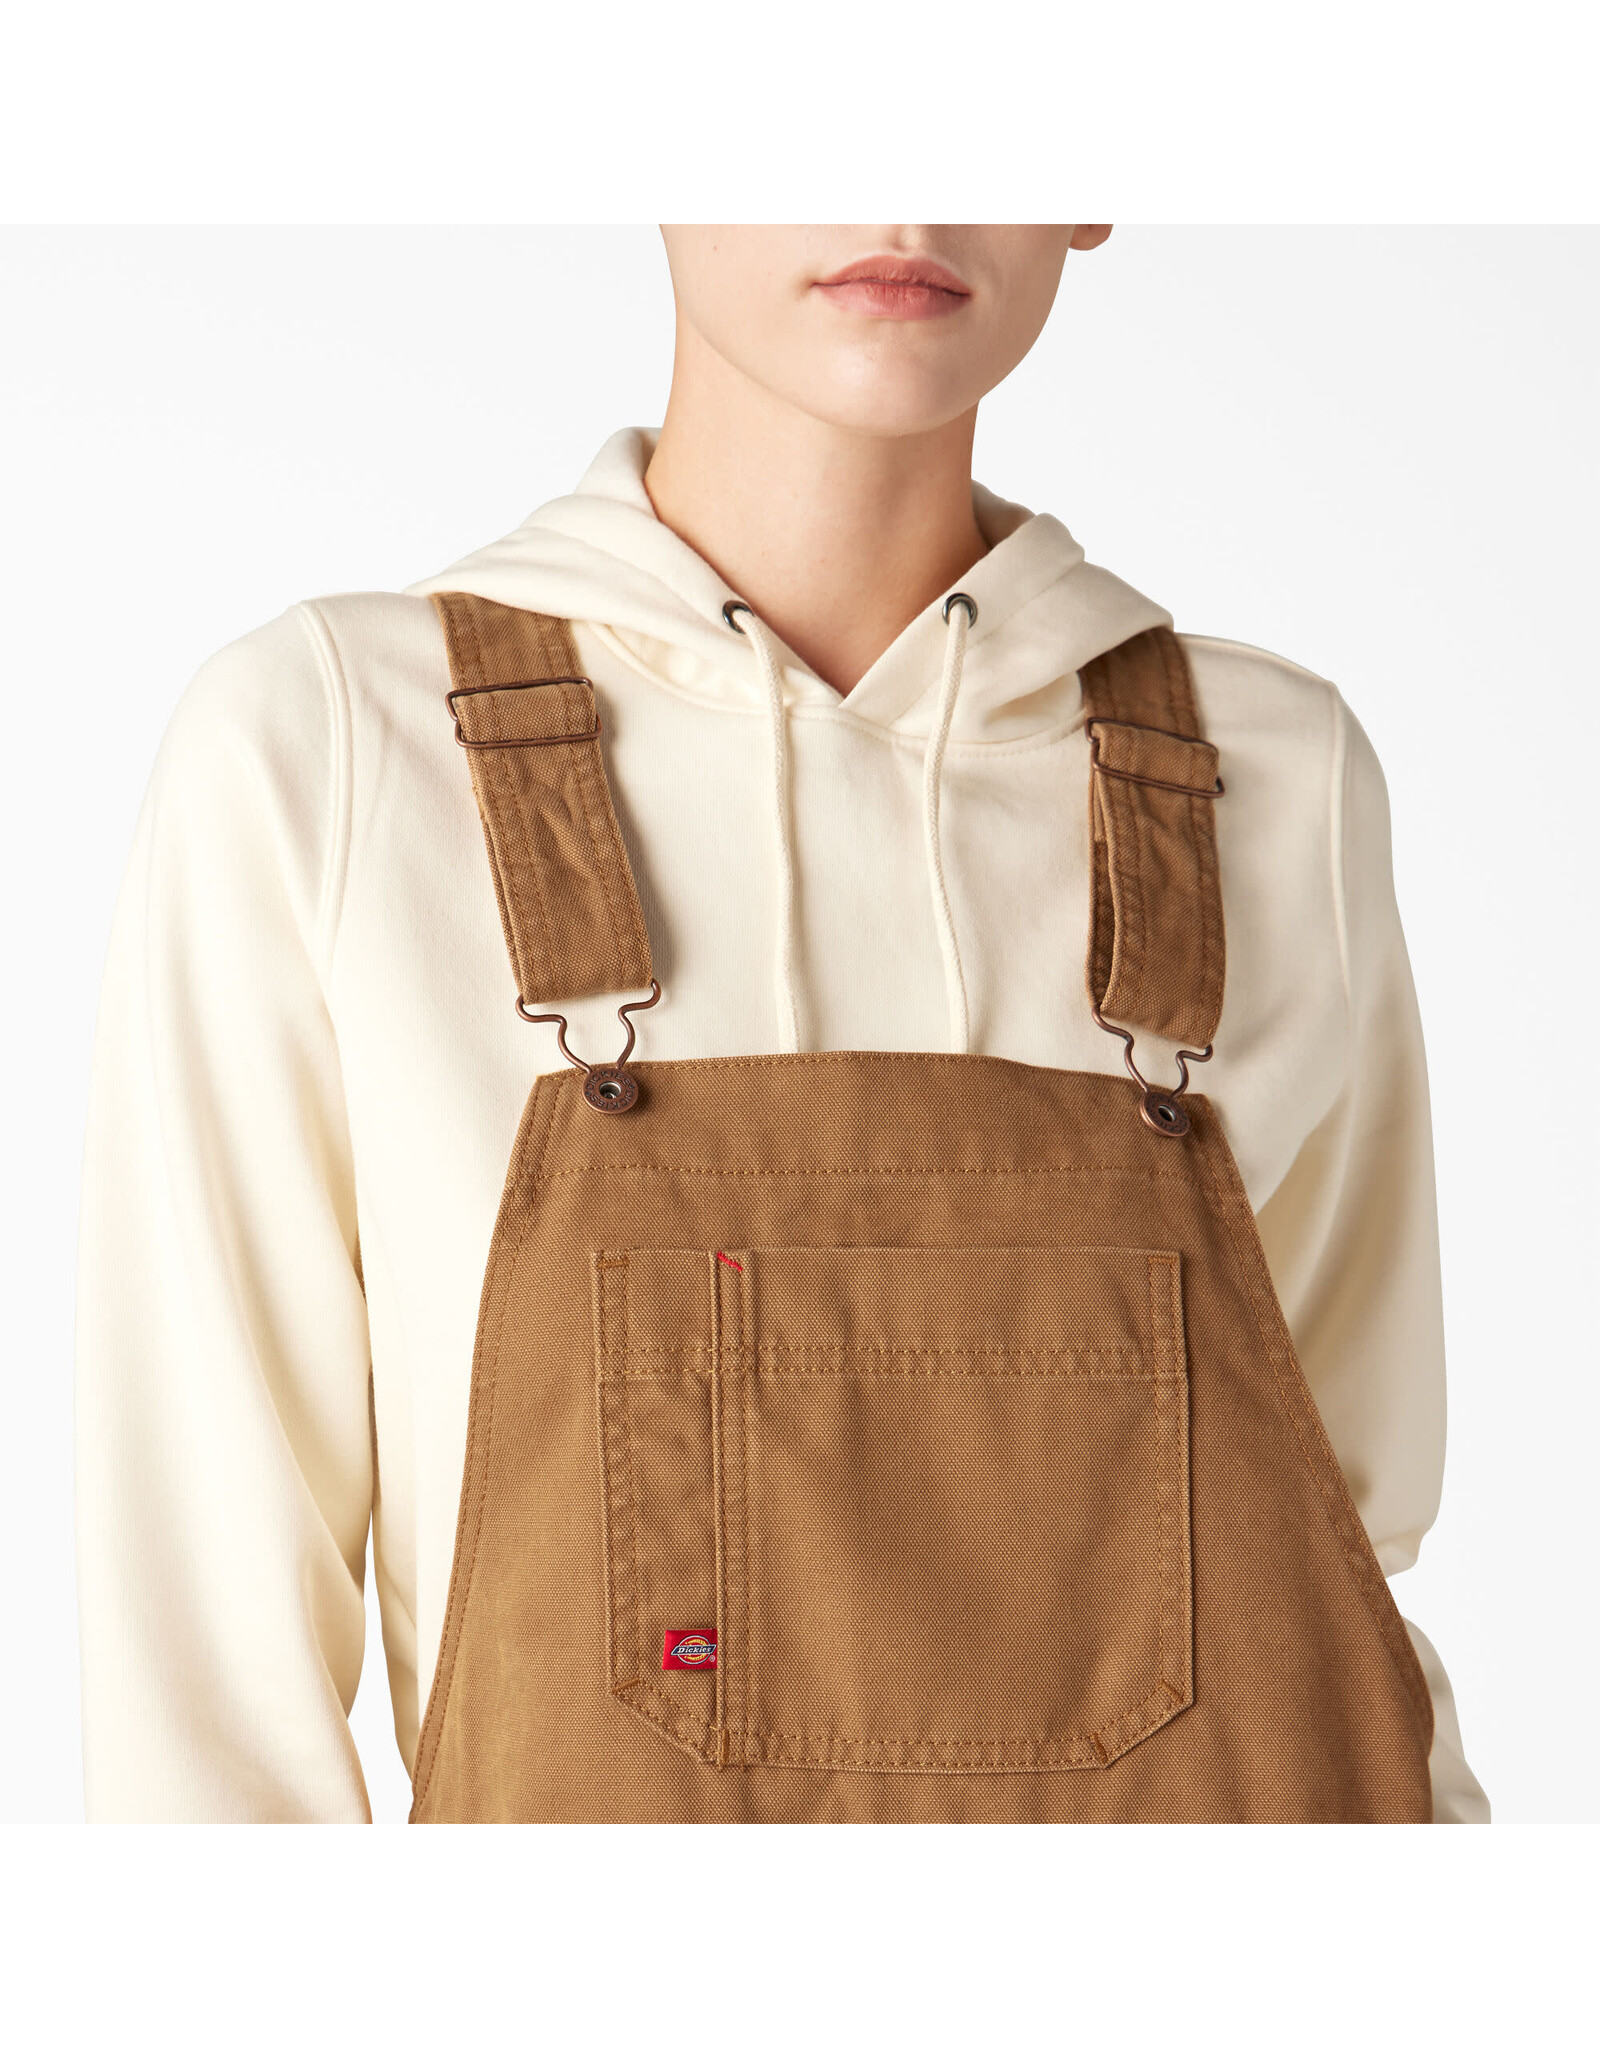 DICKIES Women's Relaxed Fit Bib Overalls Duck Brown - FB206RBD